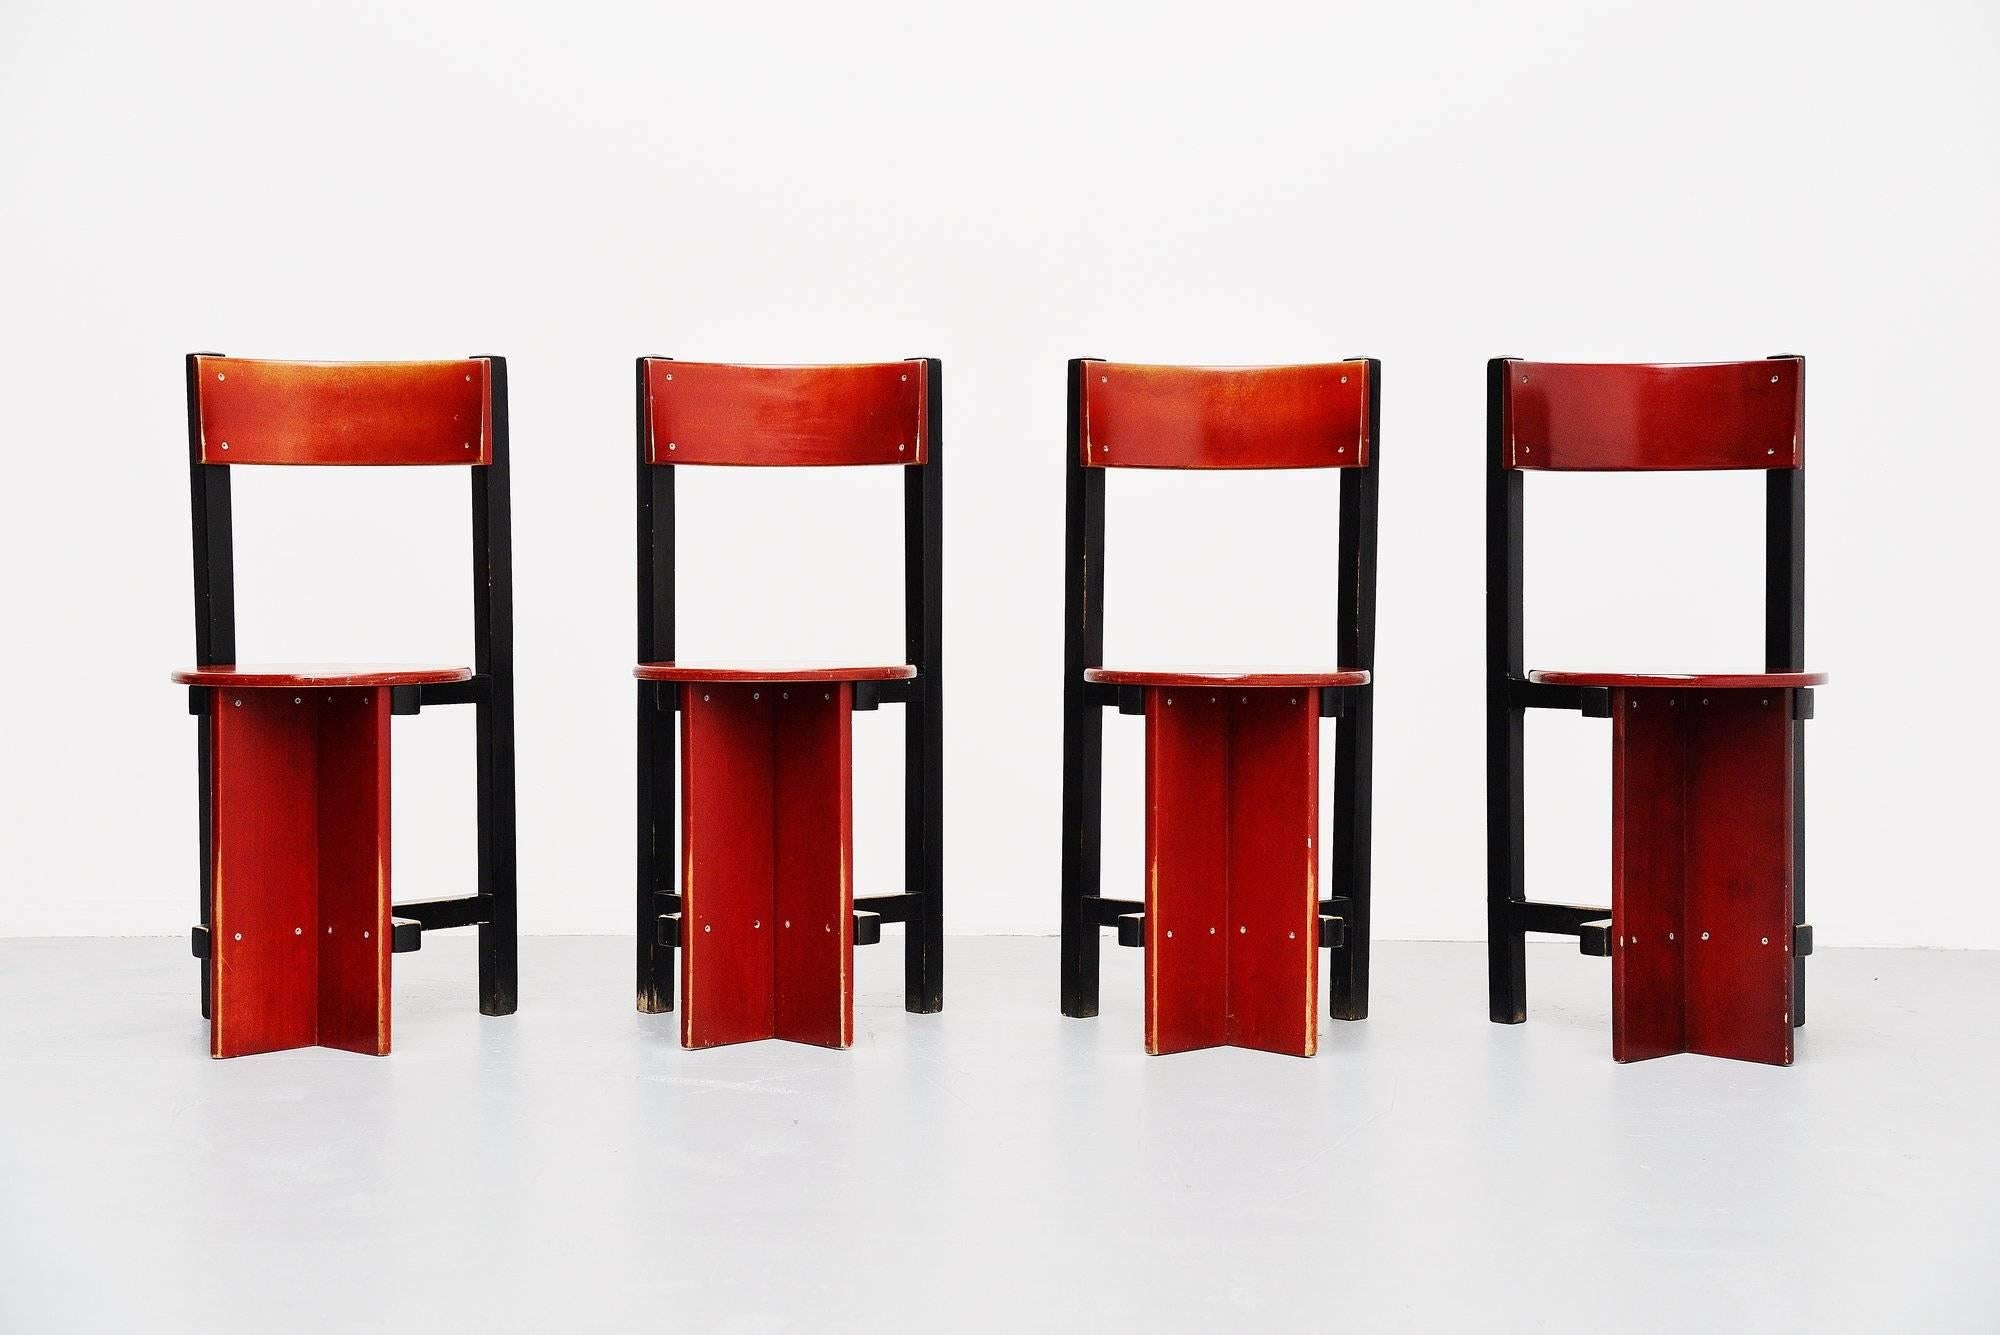 Here for a rare set of four Bastille chairs designed by Piet Blom for Twente Institute of technology, 1964. Piet Blom is better know by his cubic houses in Rotterdam and Helmond, designed in the 1980s. This example of the Bastille chair comes